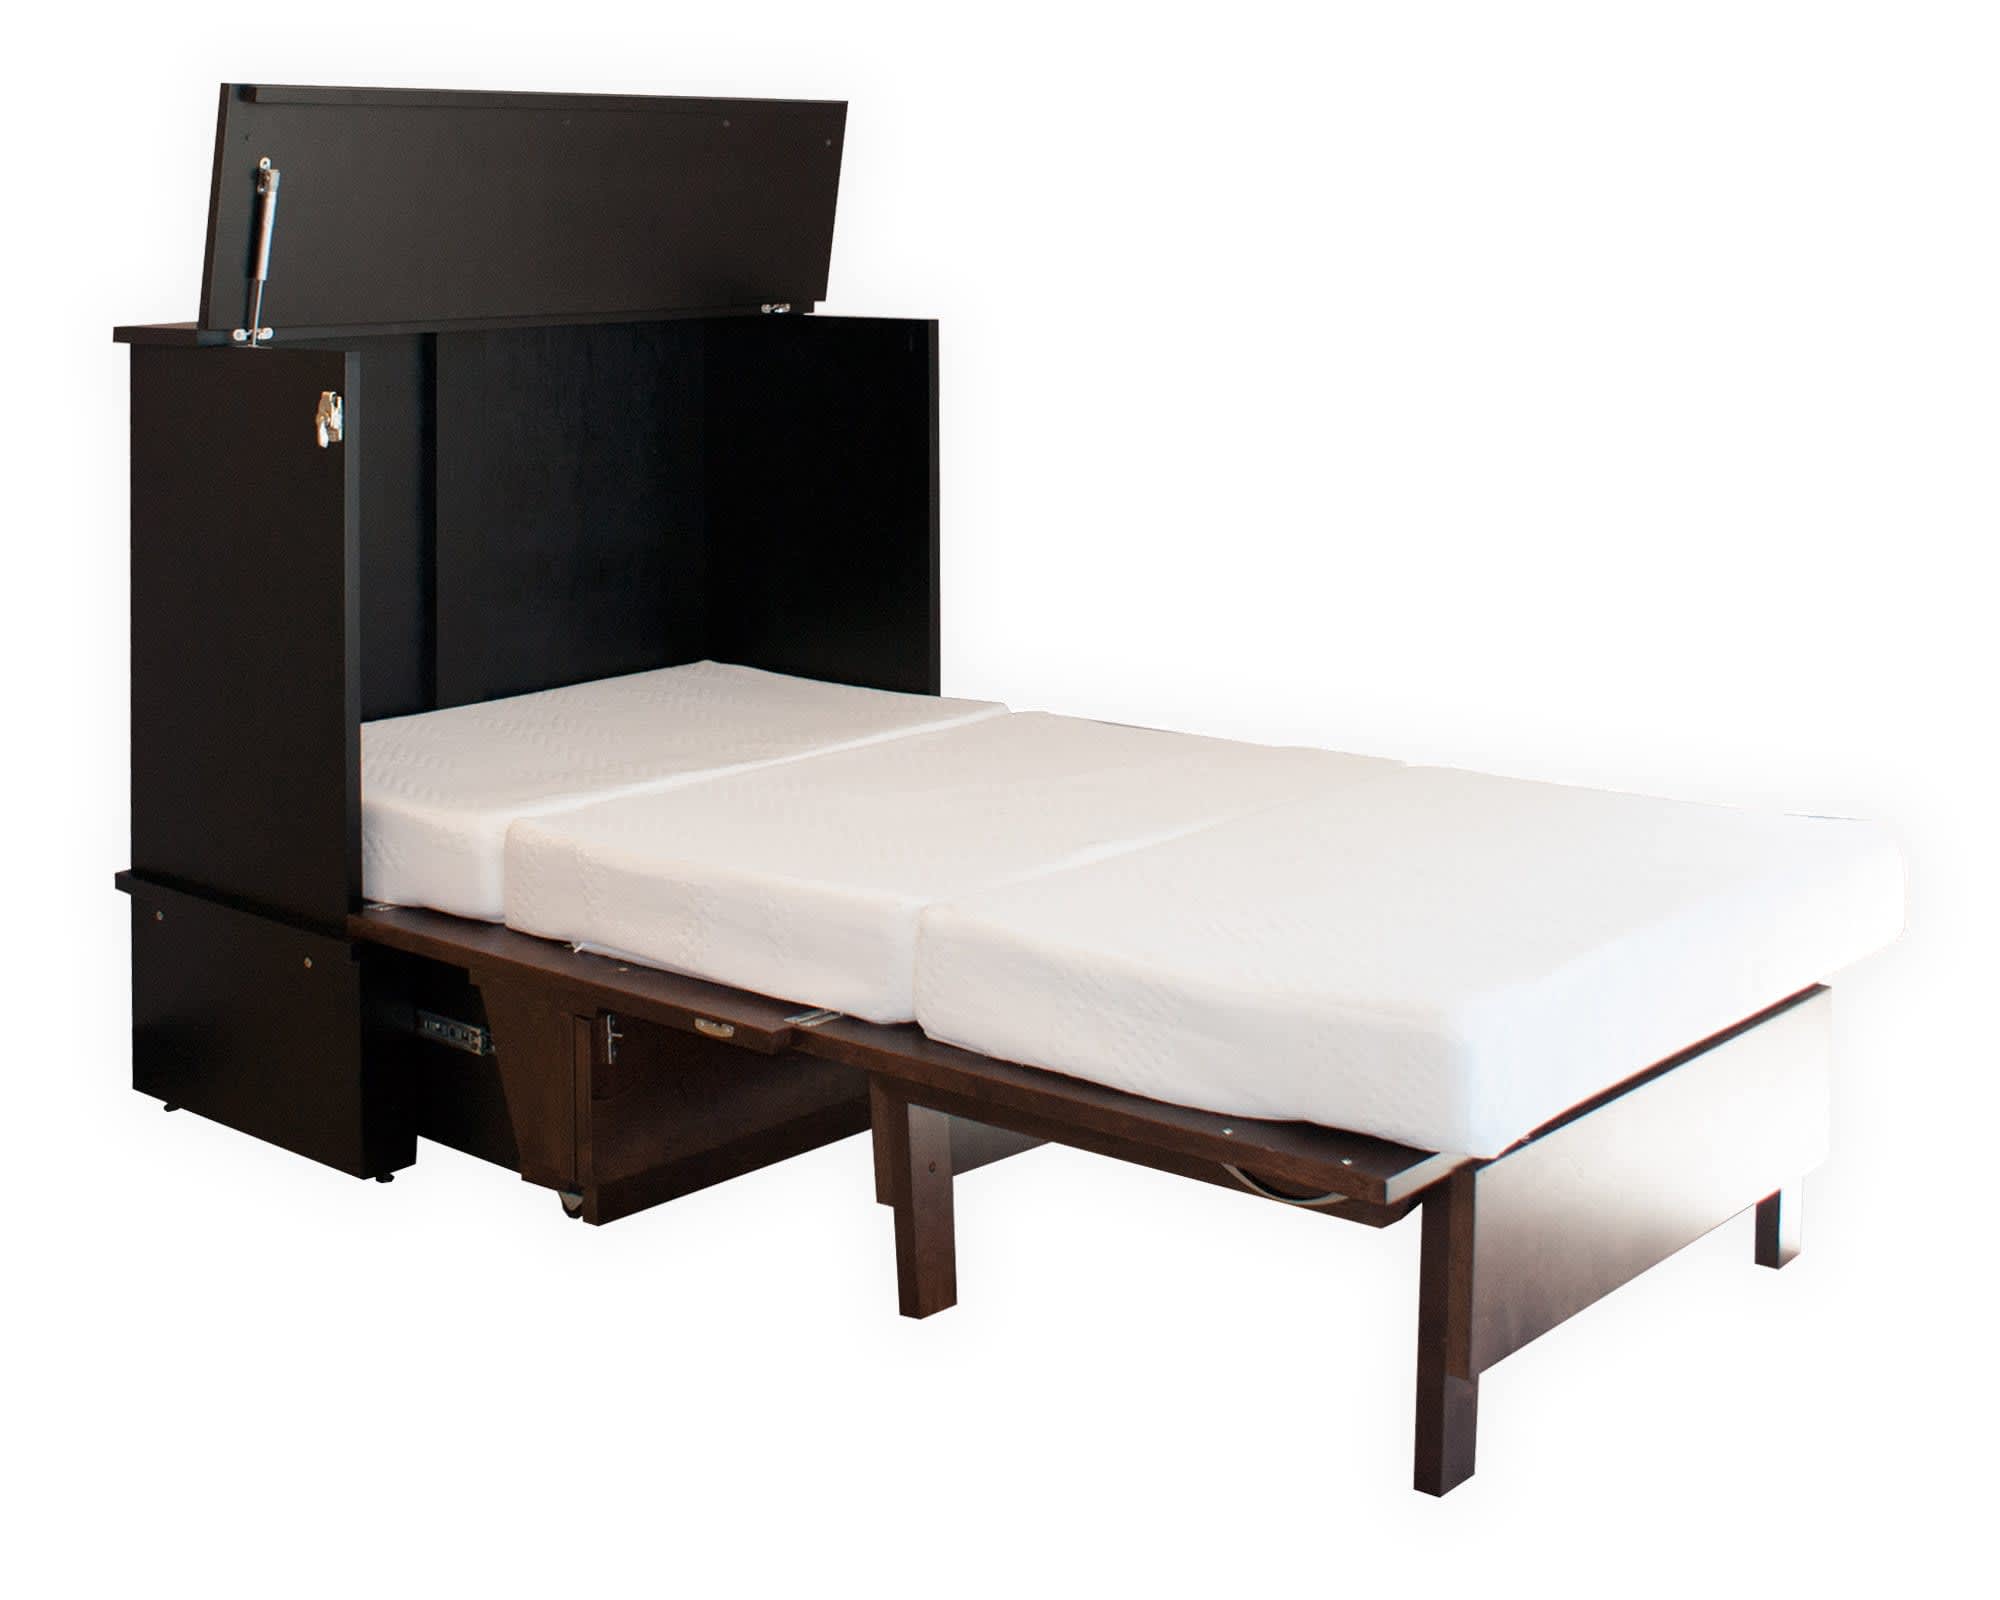 Wayfair - Mattress Included Beds You'll Love in 2022